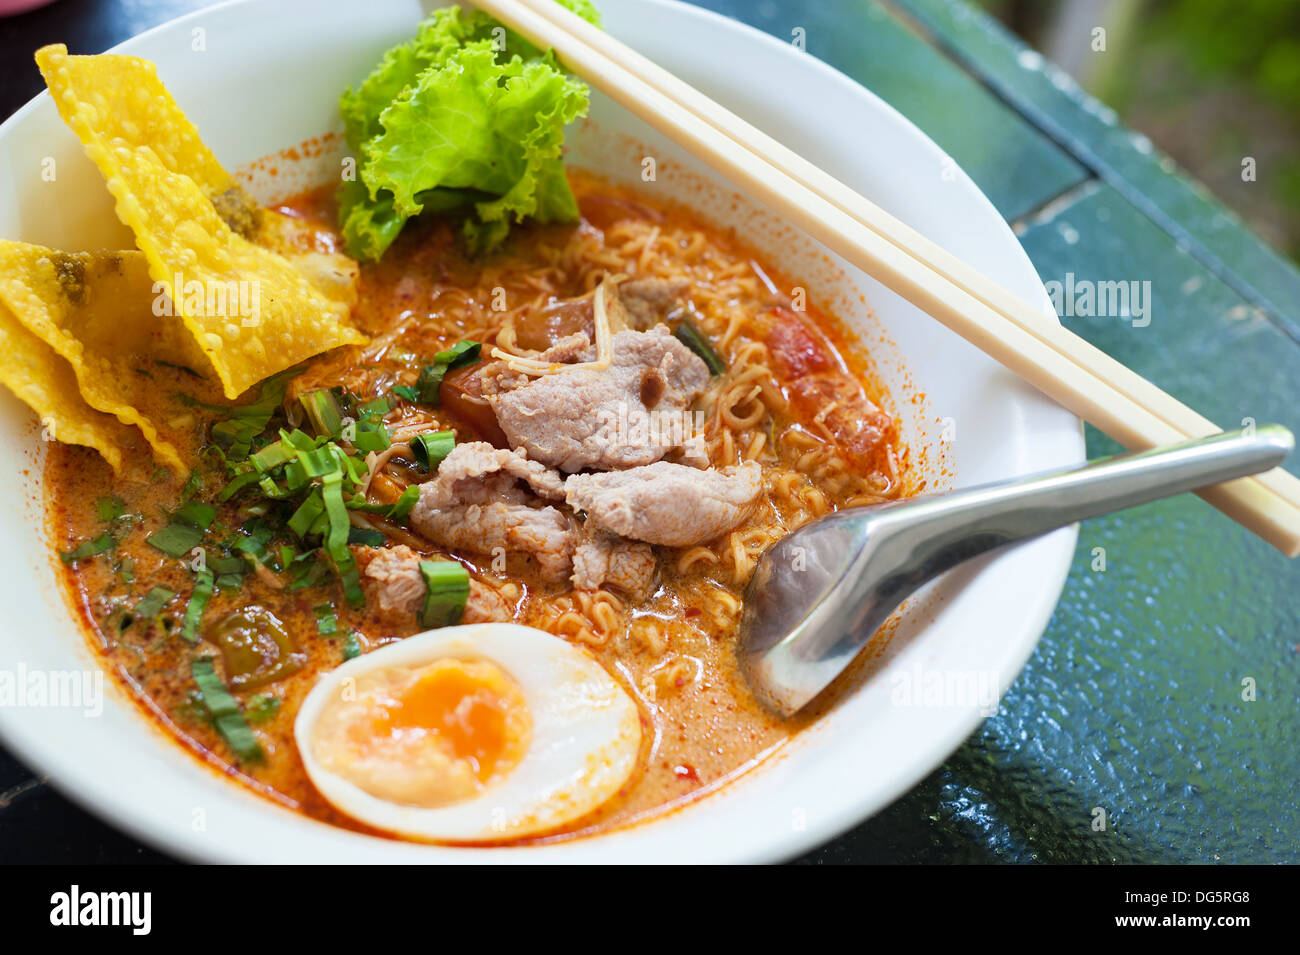 Pork noodle tom yum, condensed water egg. Stock Photo